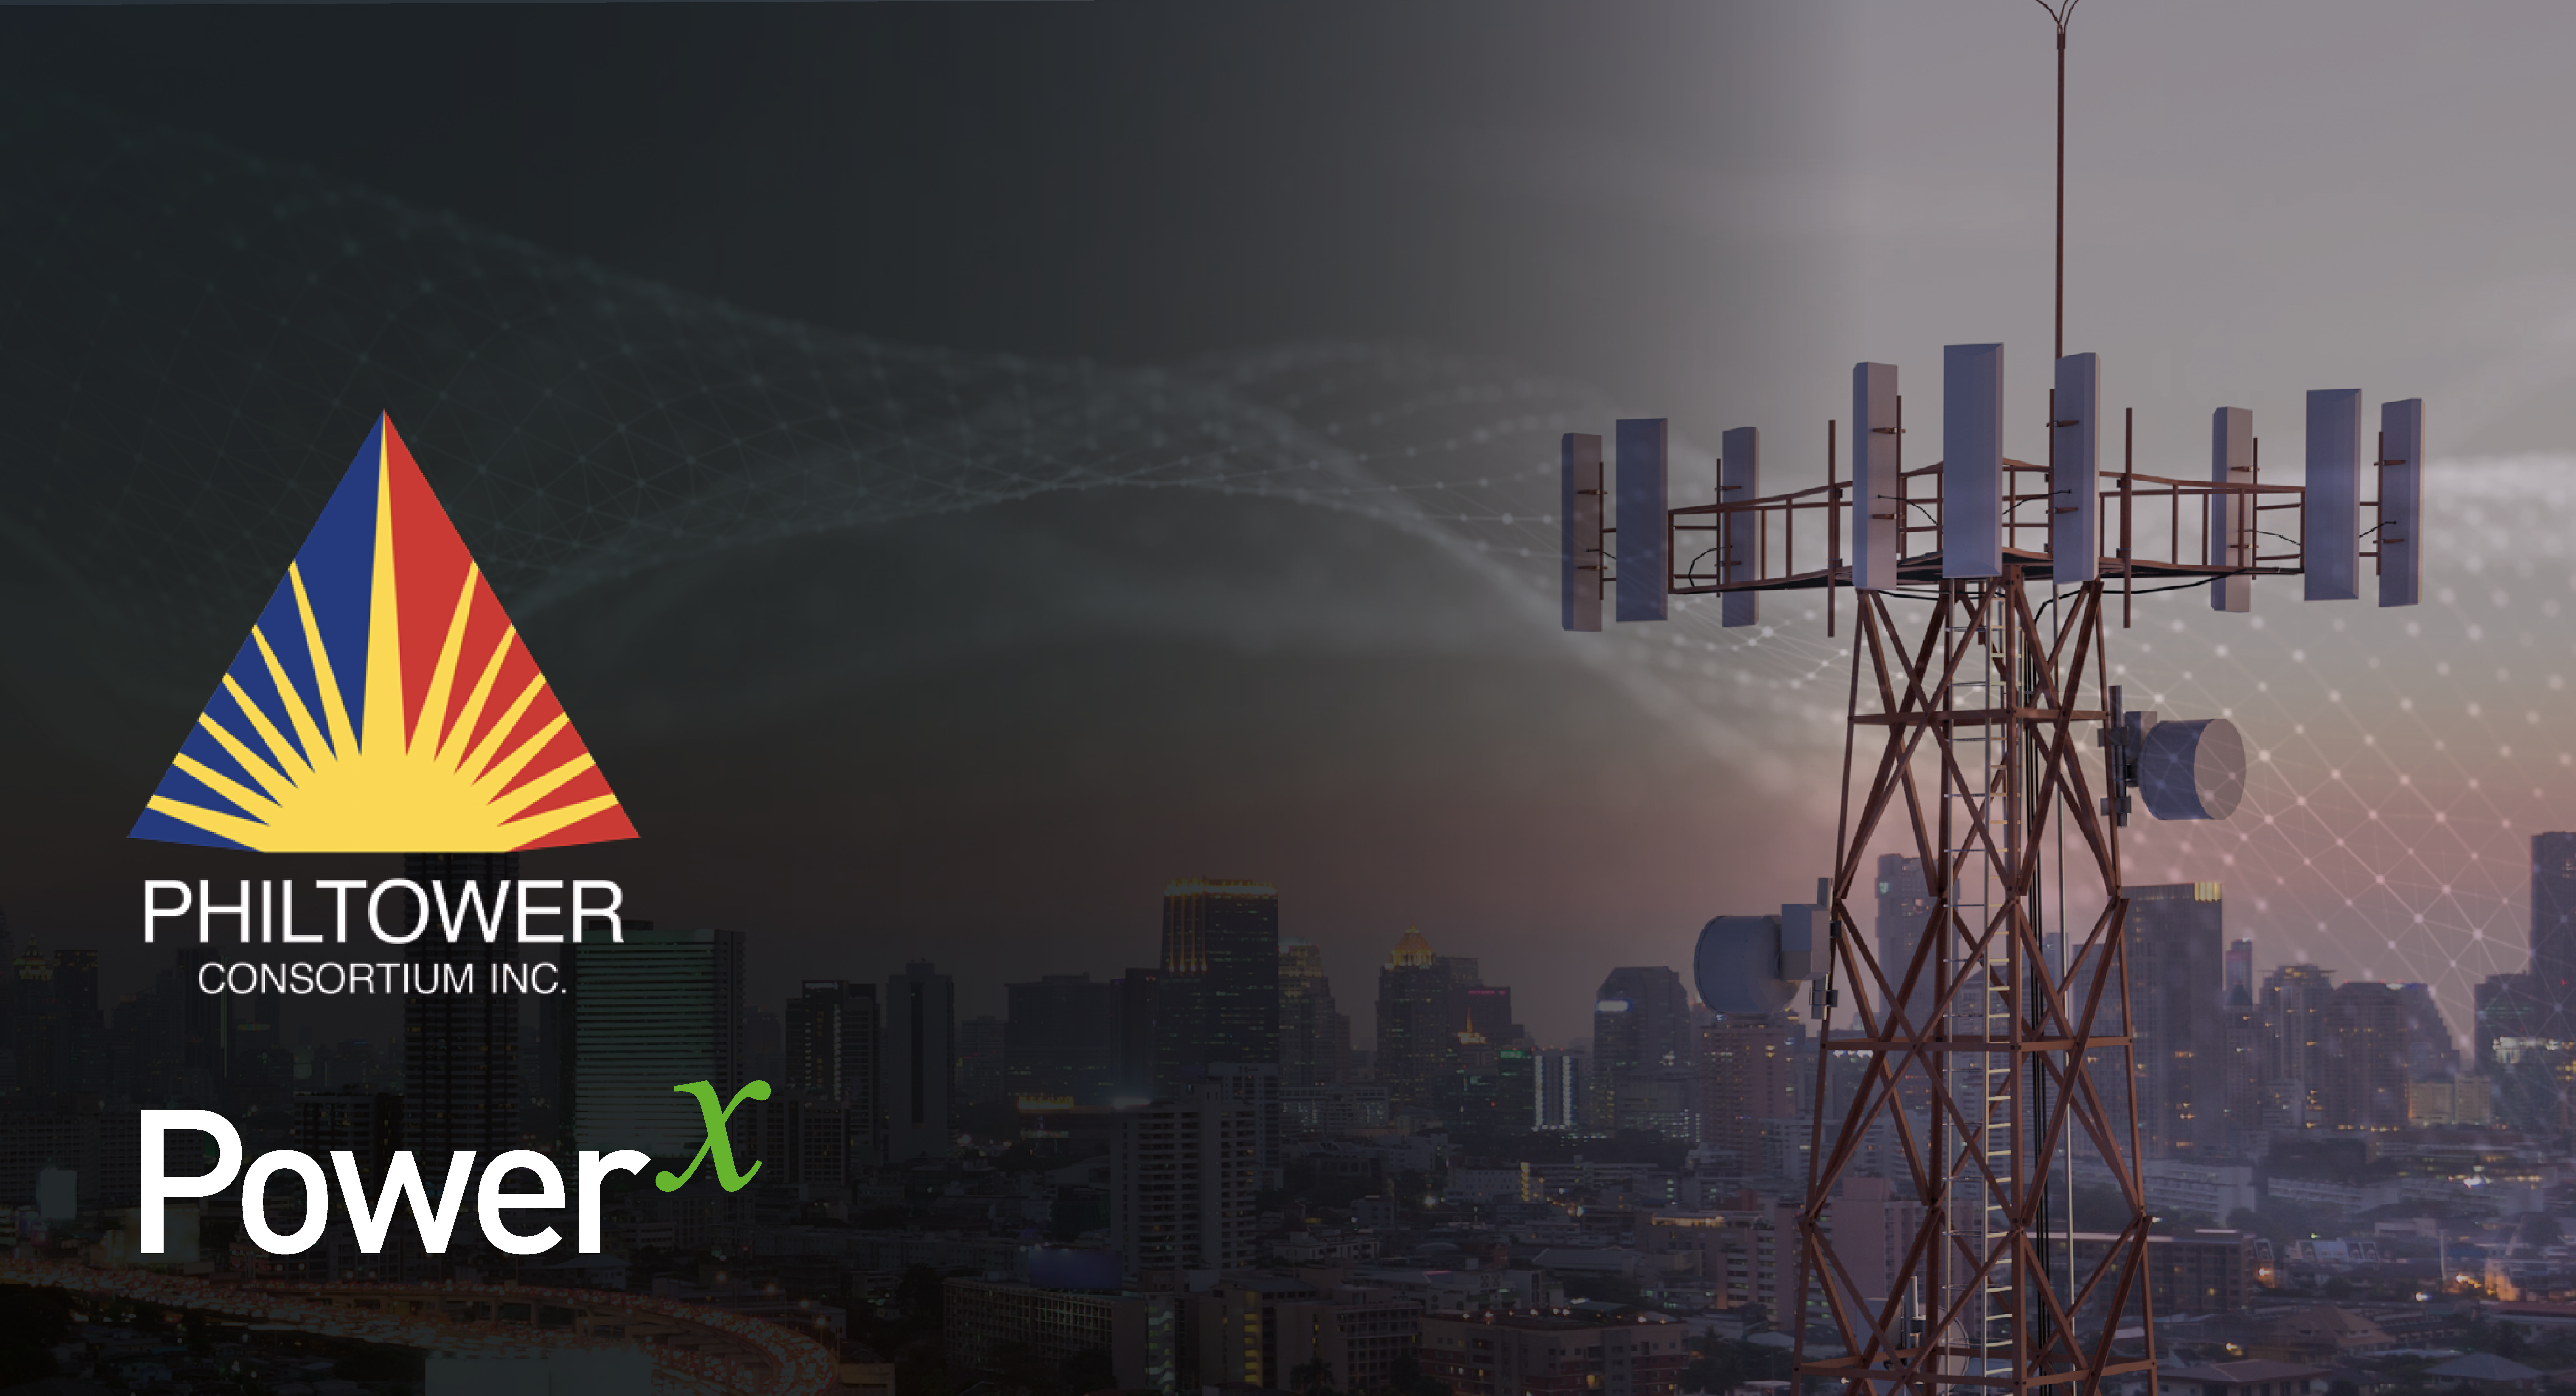 PhilTower deploys PowerX to transform mobile tower infrastructure performance with AI-powered data intelligence